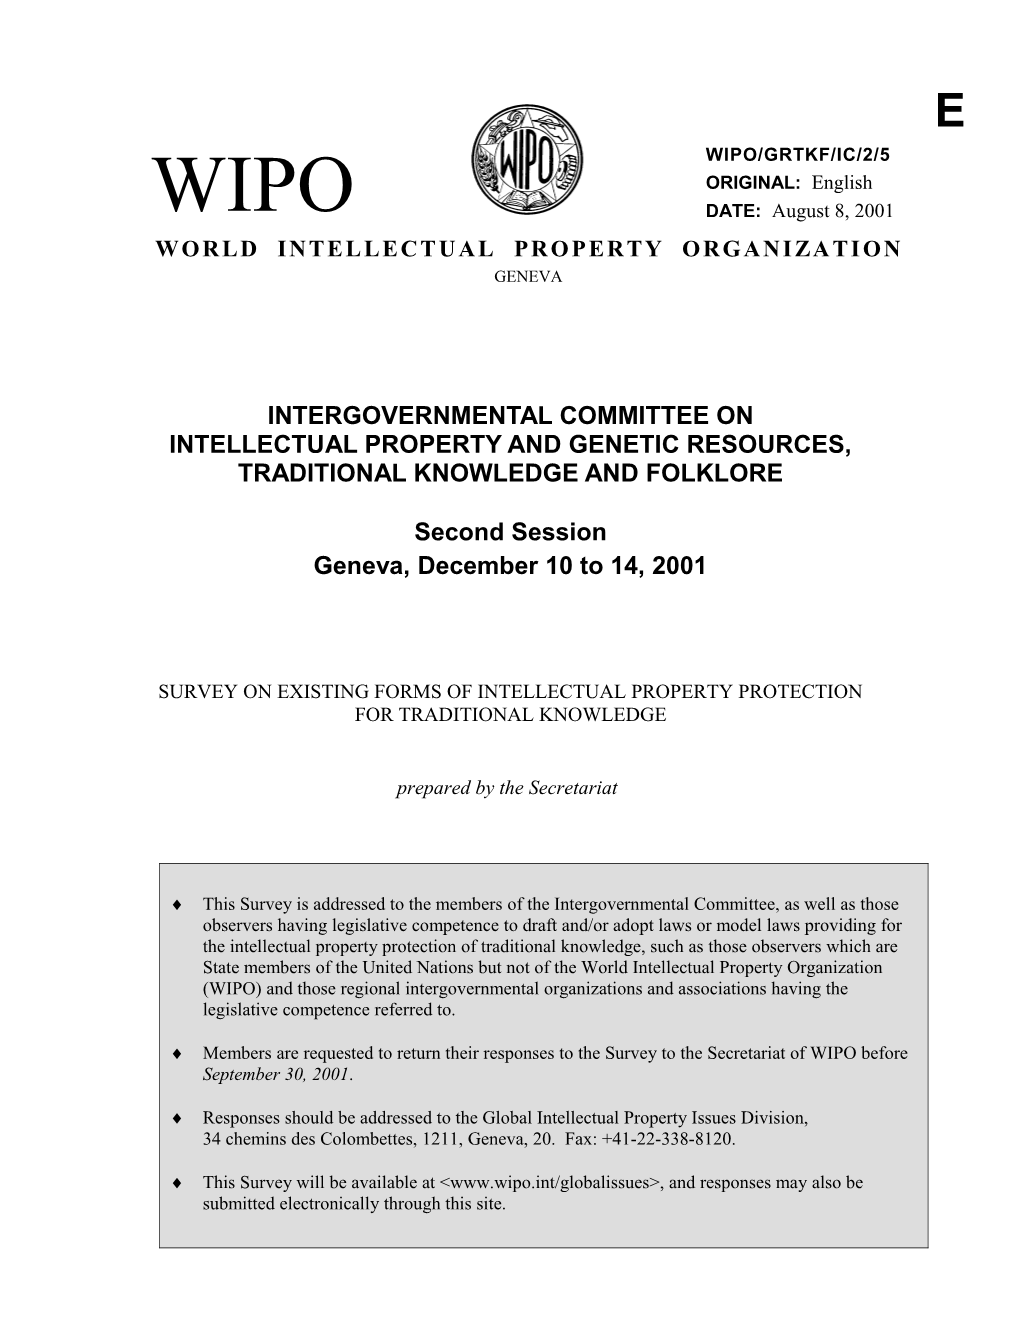 WIPO/GRTKF/IC/2/5: Survey of Existing Forms of Intellectual Property Protection for Traditional